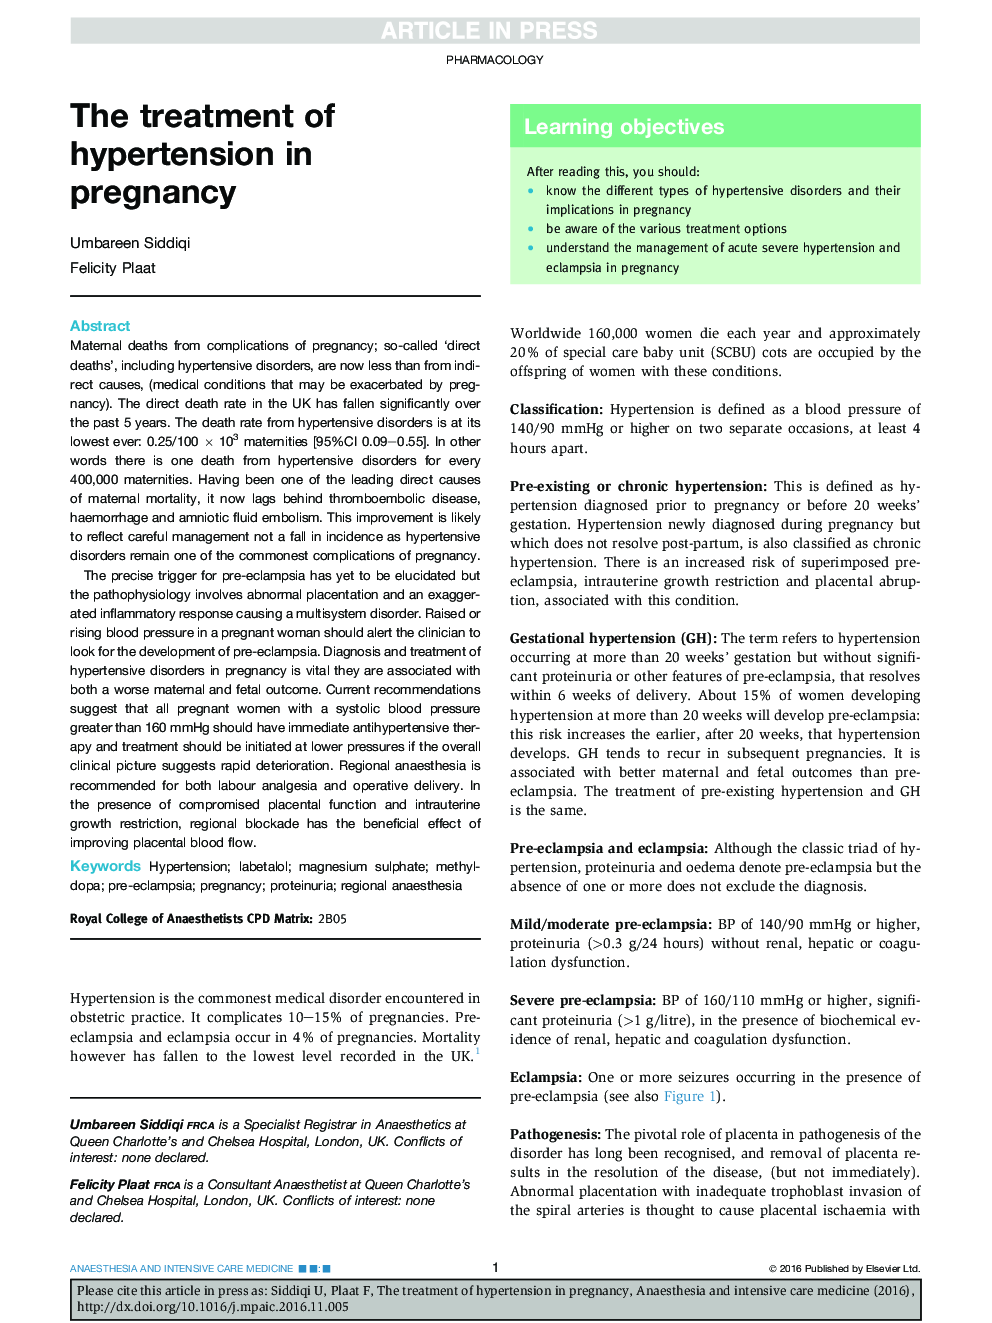 The treatment of hypertension in pregnancy